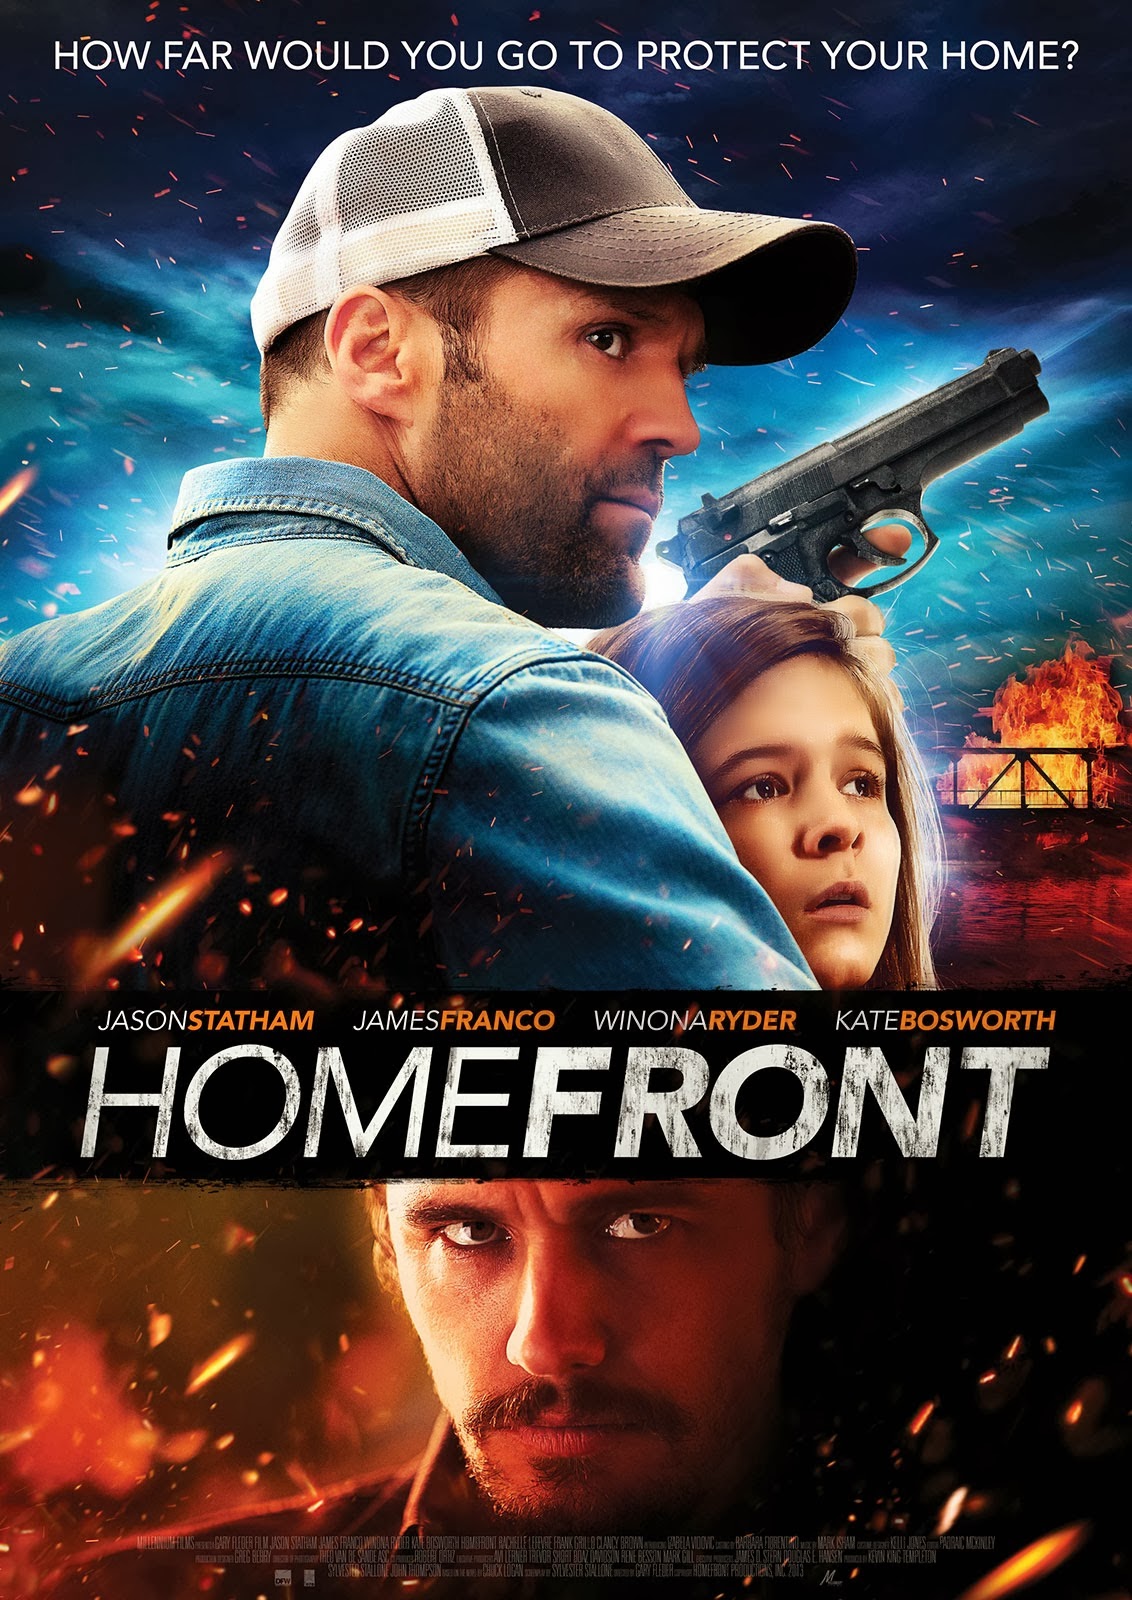 Download this Homefront Hollywood Movie picture